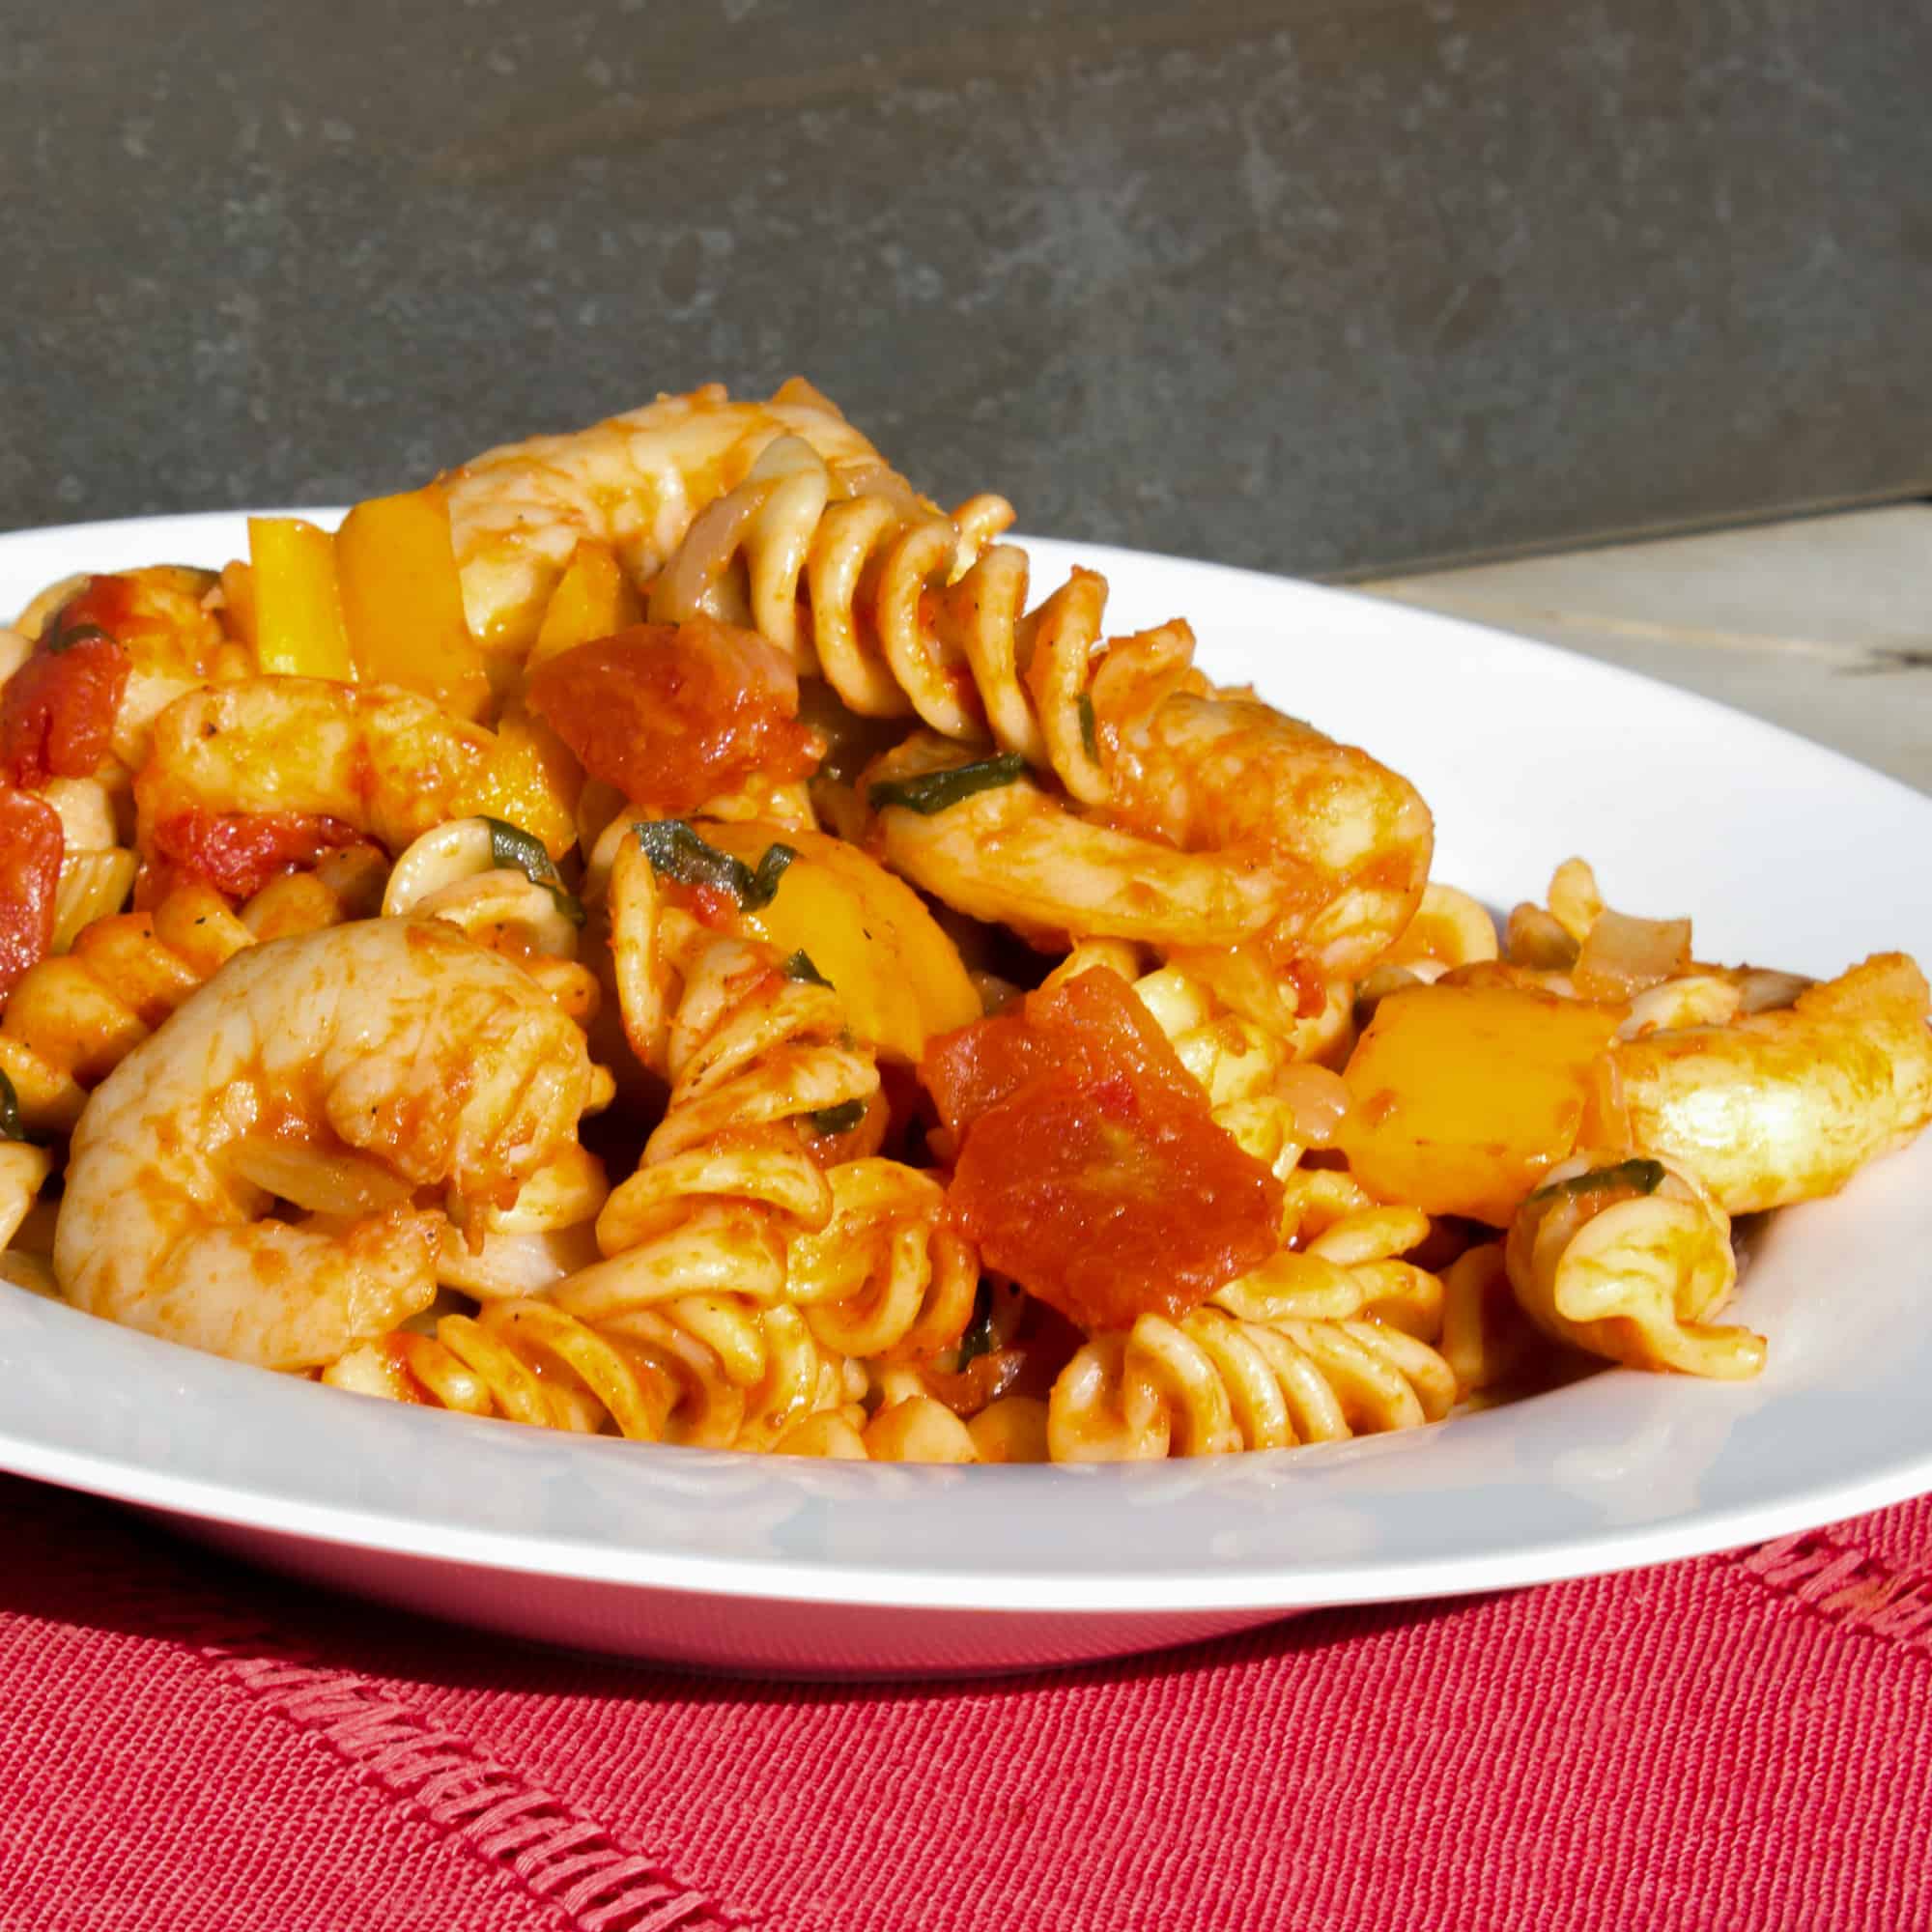 Shrimp pomodoro with rotini pasta. Easy Italian tomato based marinara sauce with white wine, peppers, onions, celery and garlic with tender shrimp as the seafood.